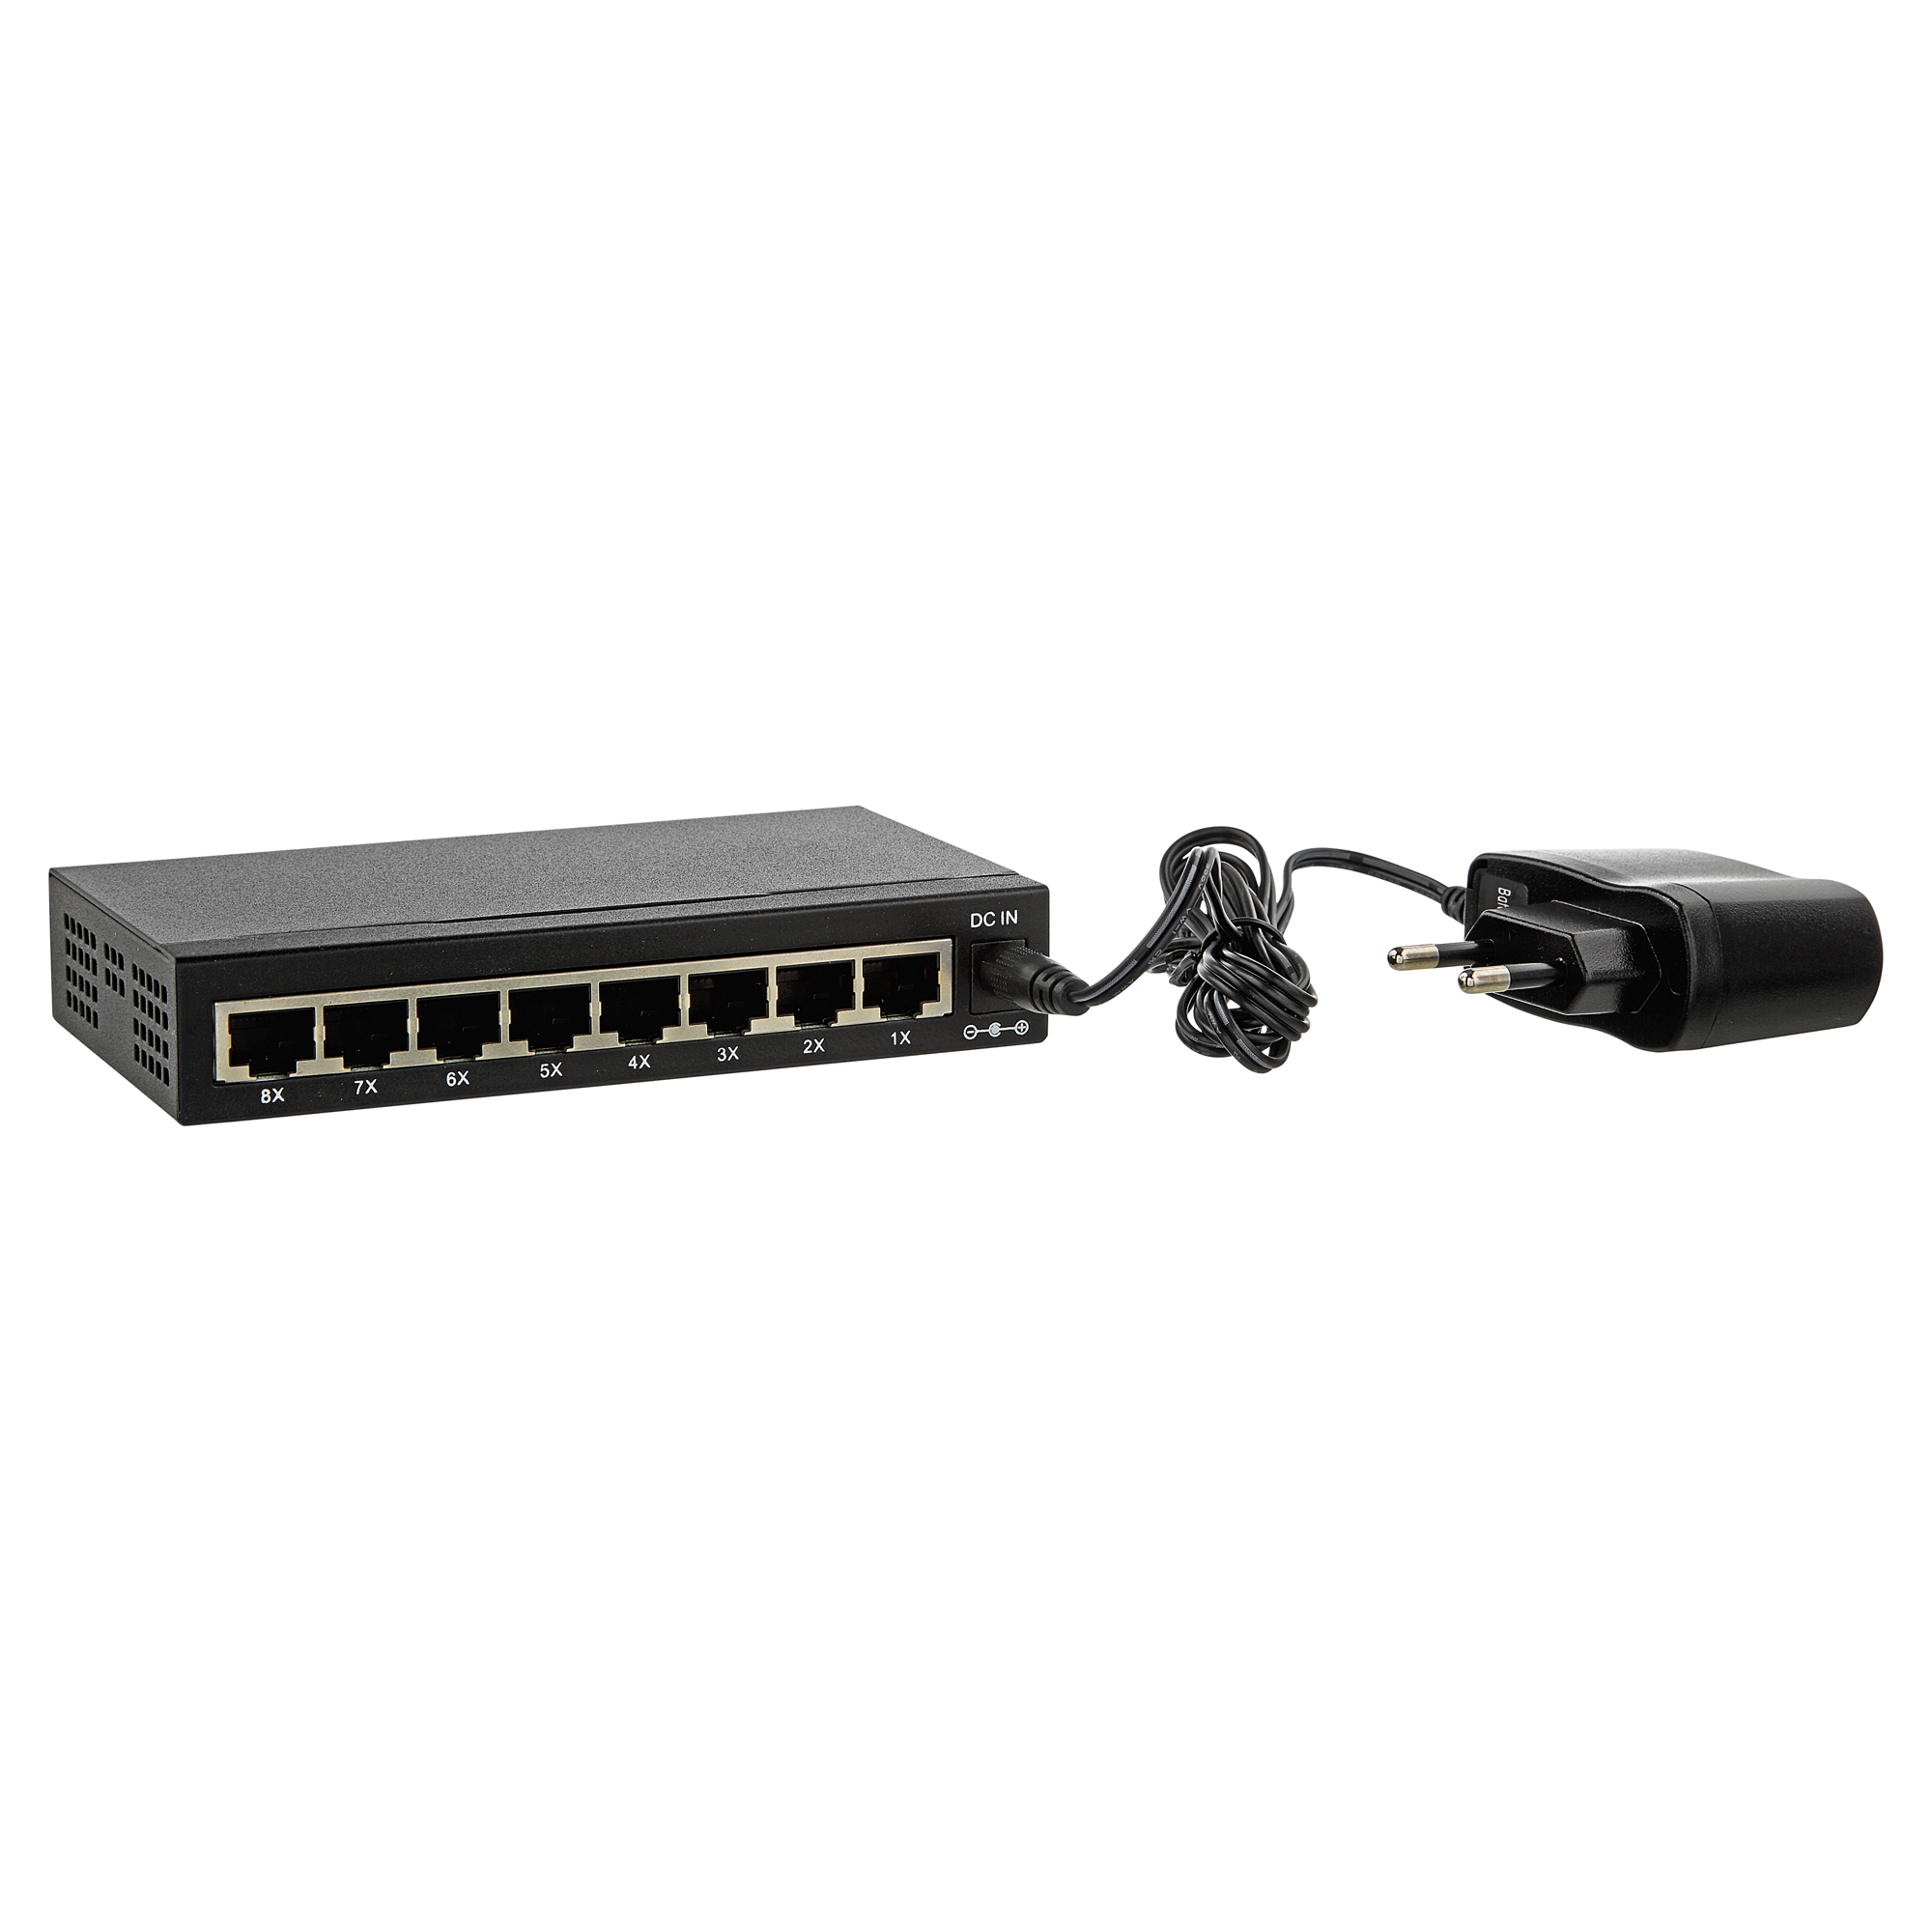 Netzwerk-Switch NWSW 8 Professional 8-fach + product picture